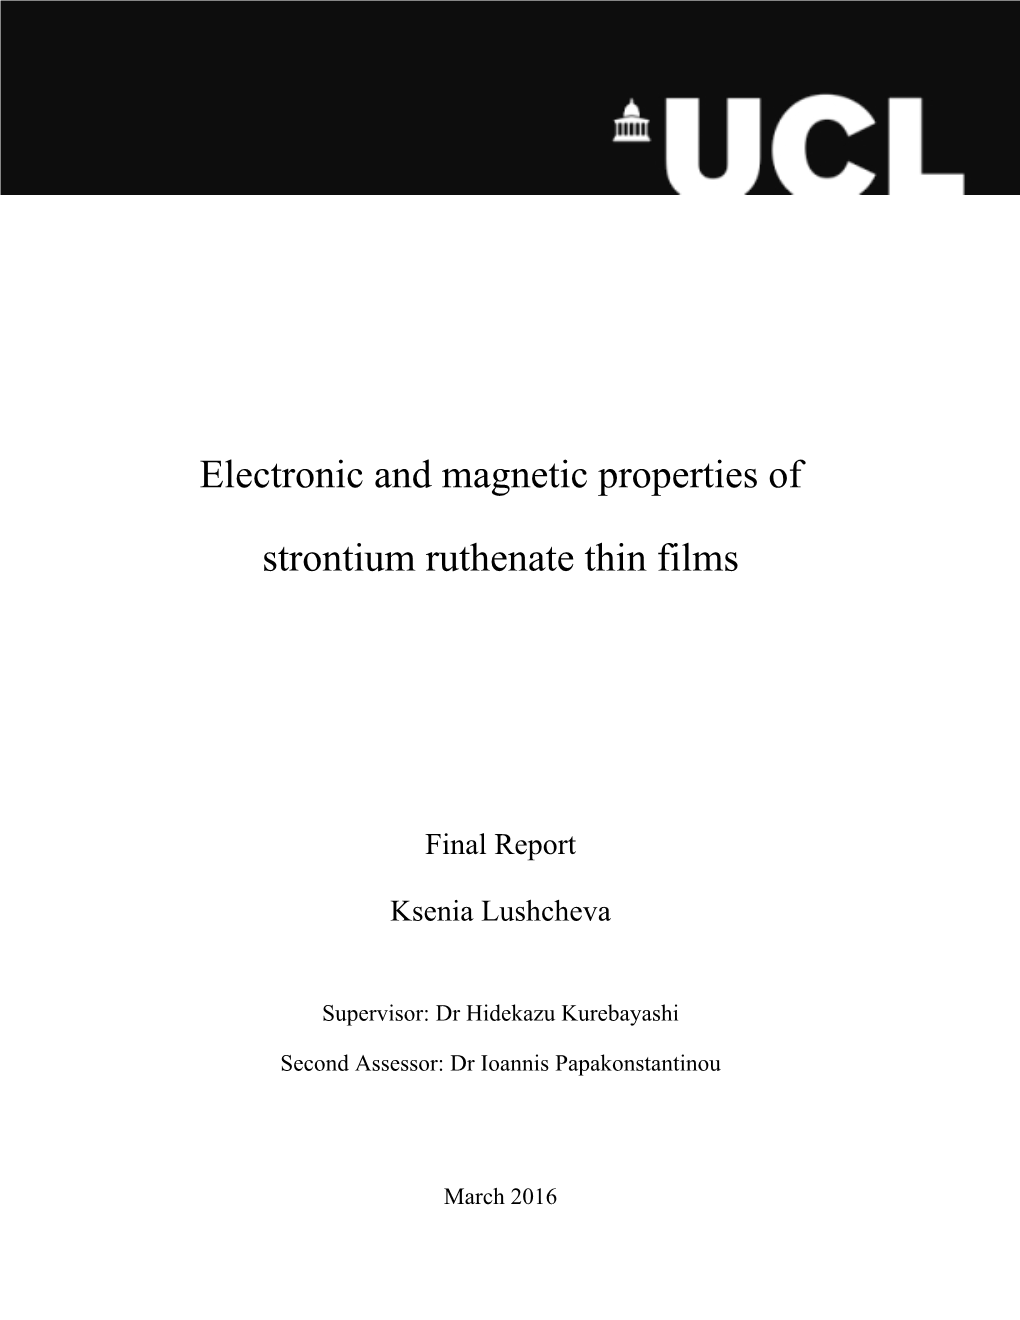 Electronic and Magnetic Properties of Strontium Ruthenate Thin Films